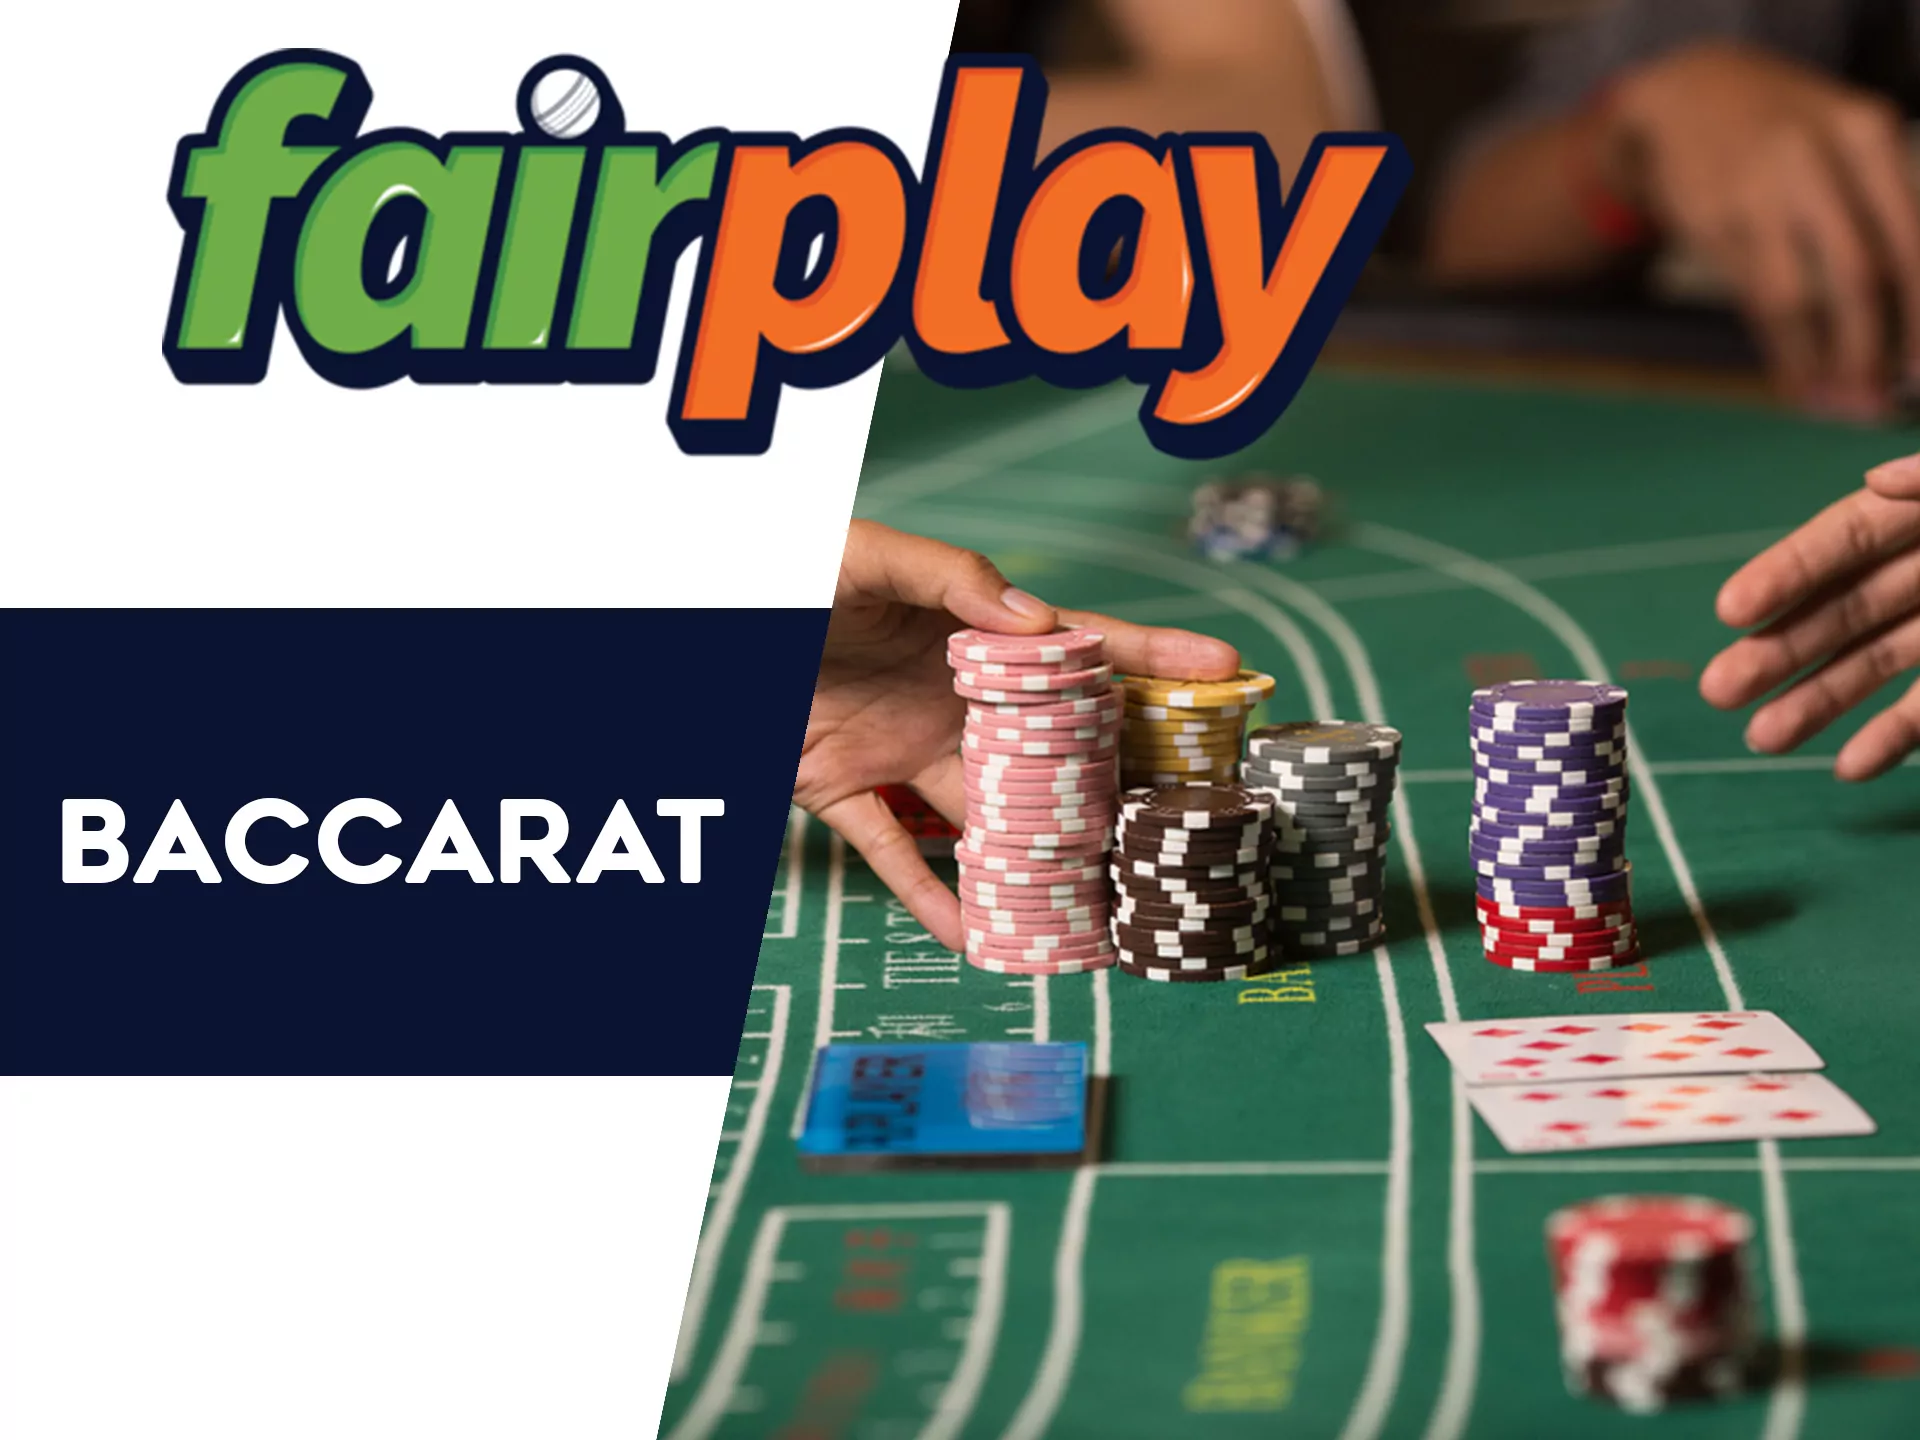 Baccarat is available for playing in the Fairplay casino.